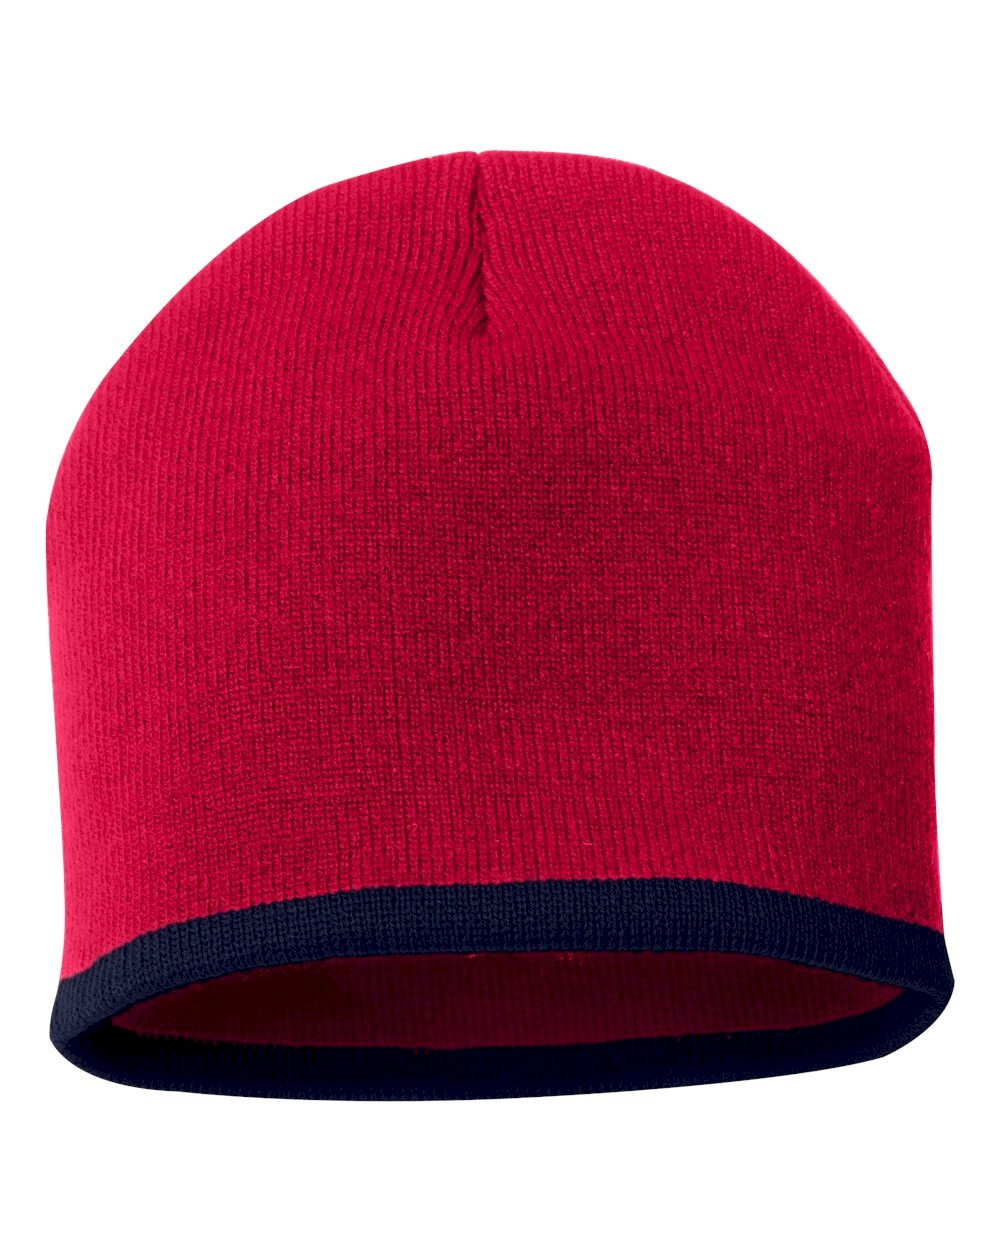 8" Knit Beanie with Striped Bottom Embroidery Blanks - RED/NAVY